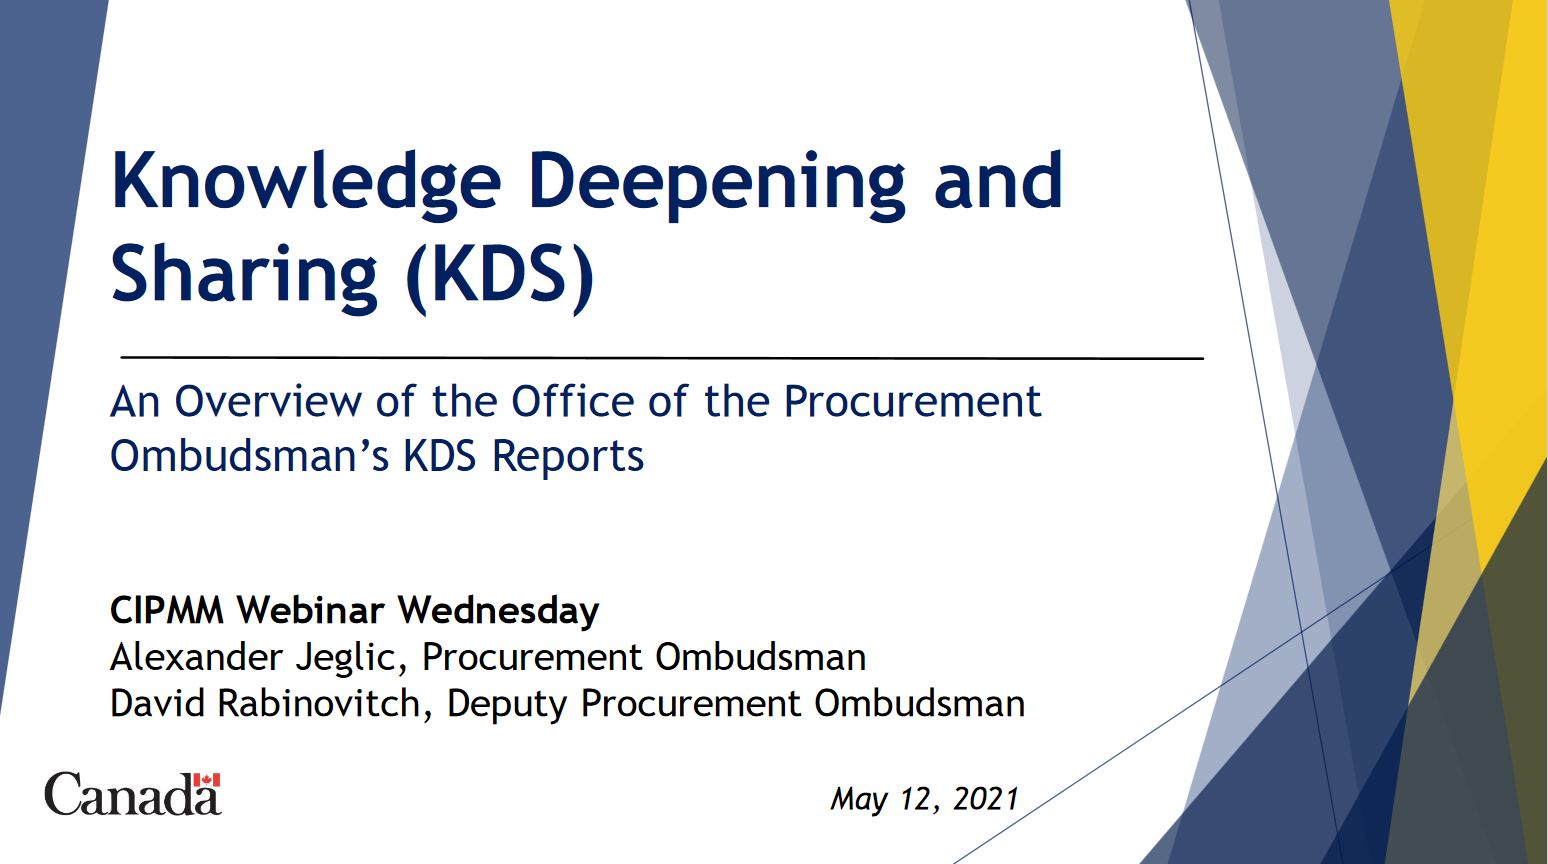 Overview of Research Conducted in the Office of the Procurement Ombudsman